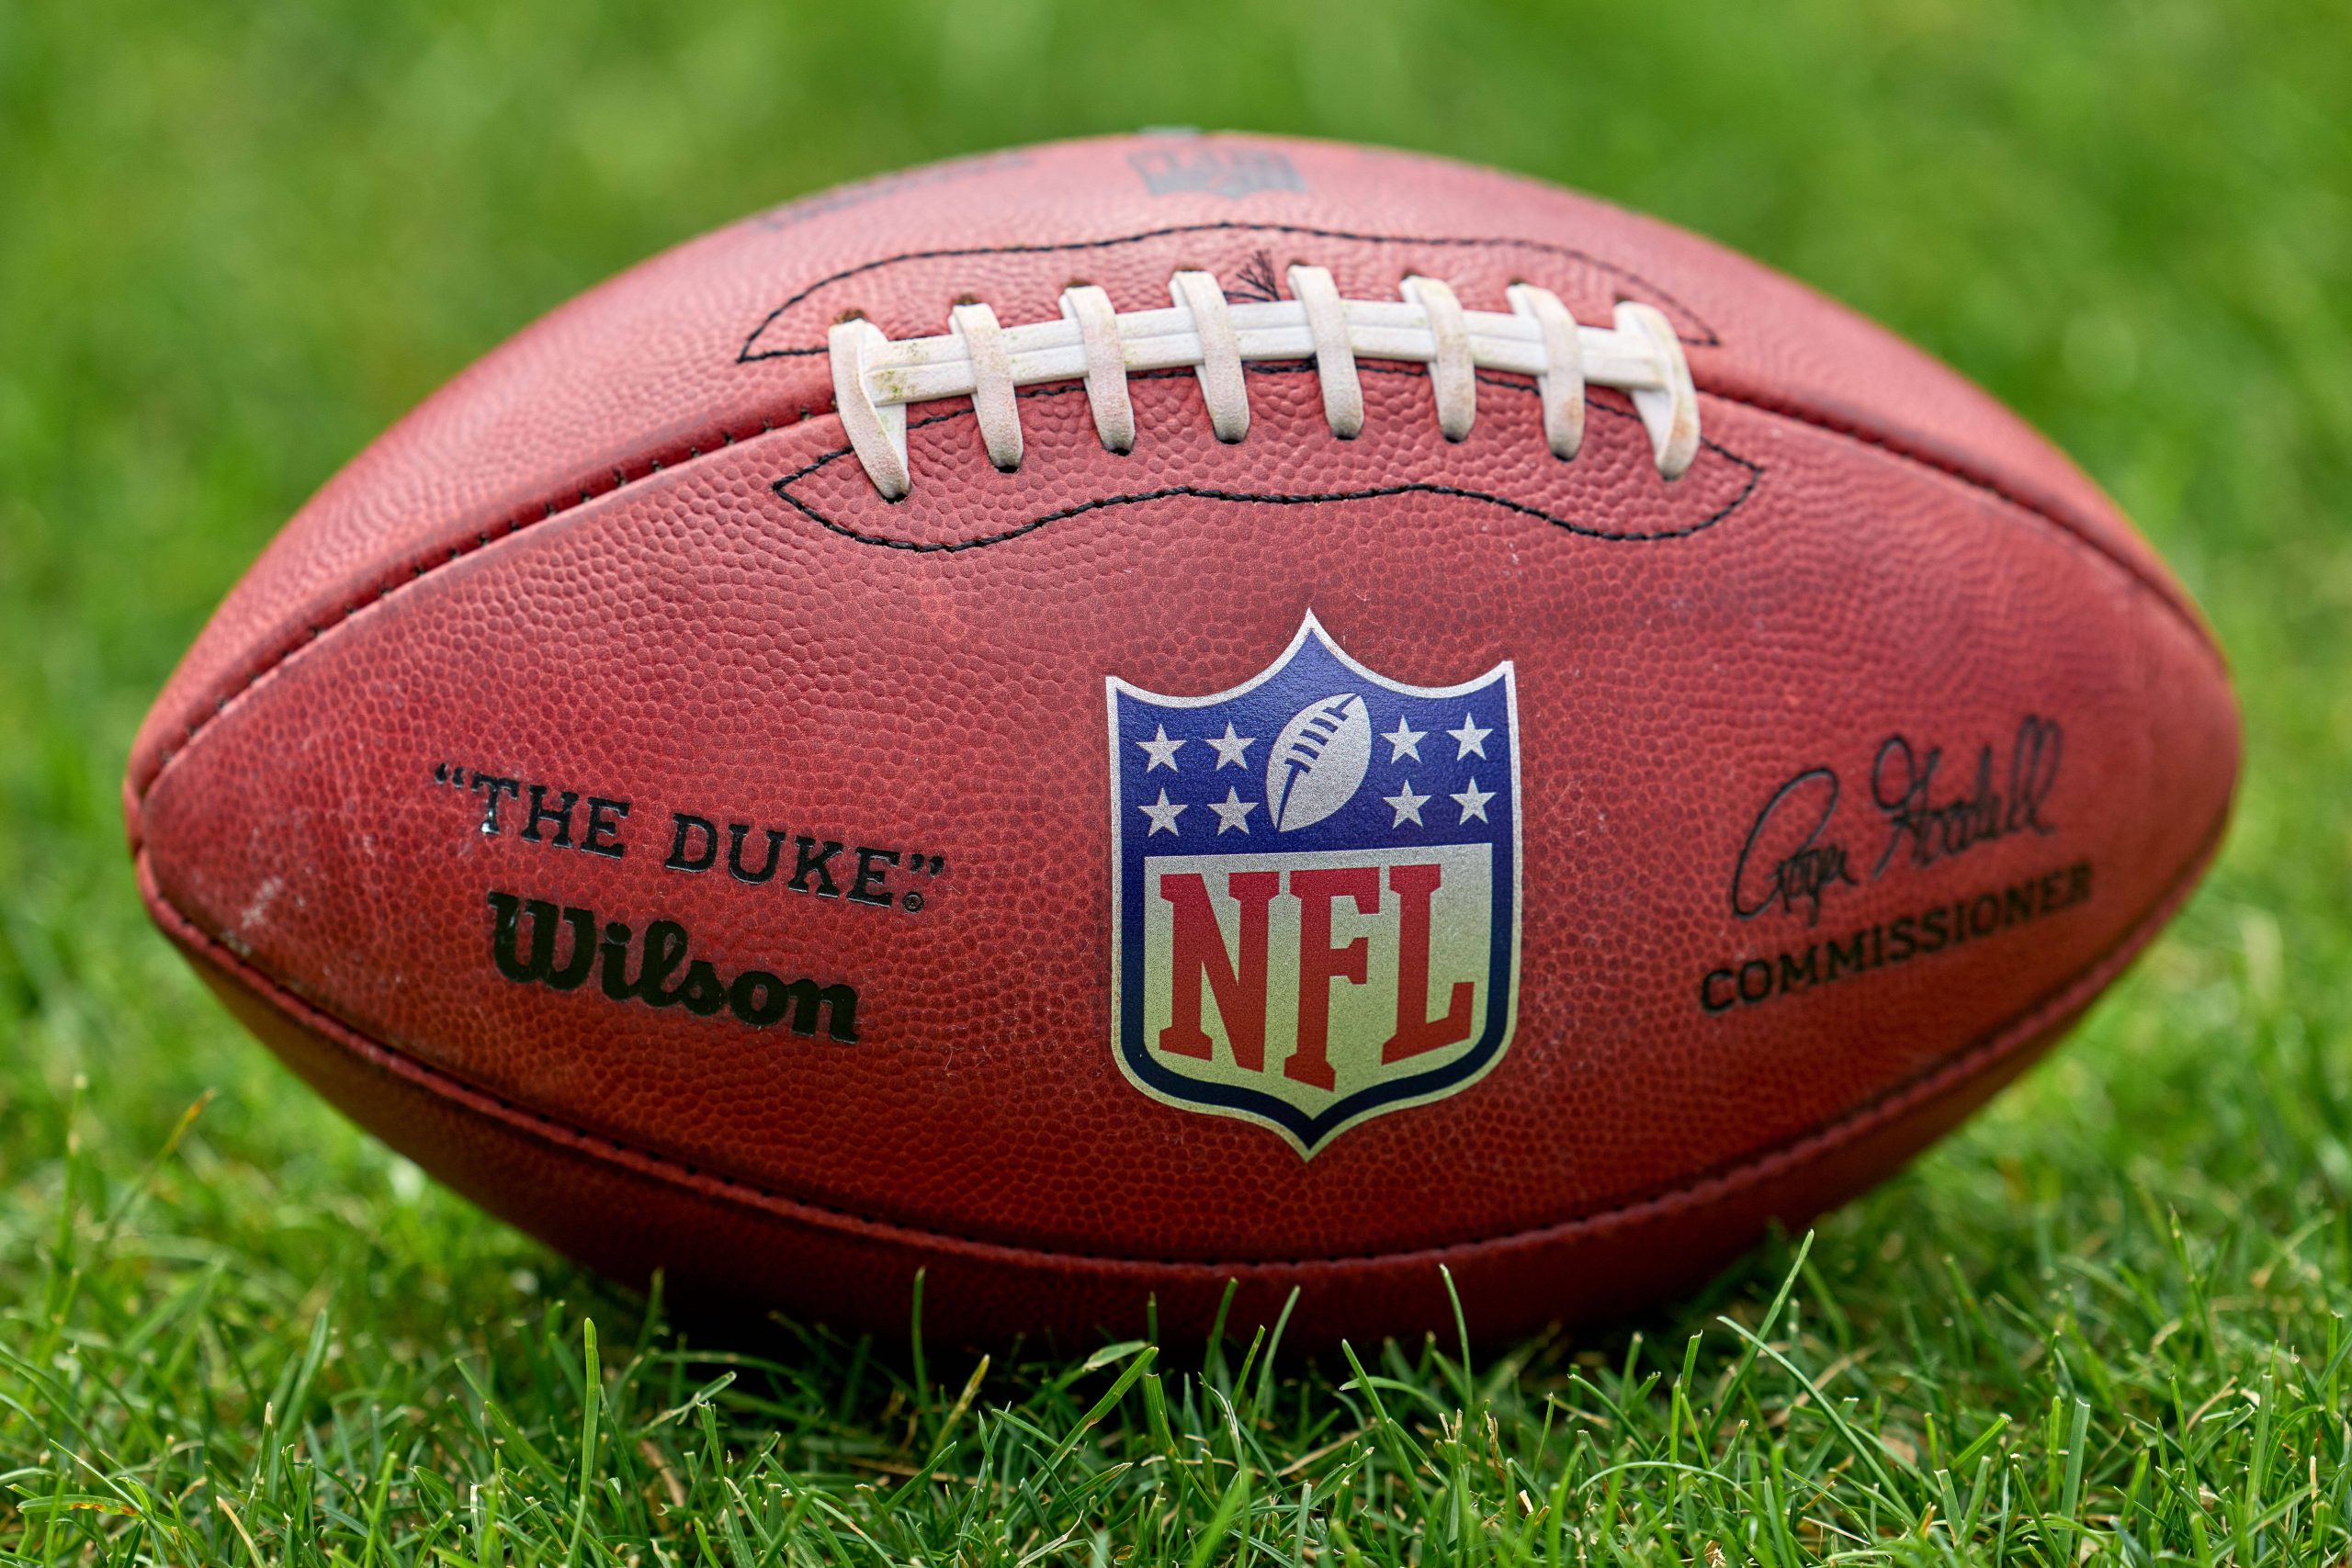 CHICAGO, IL - AUGUST 21: A detail view of the NFL, American Football Herren, USA crest logo is seen on a Wilson football